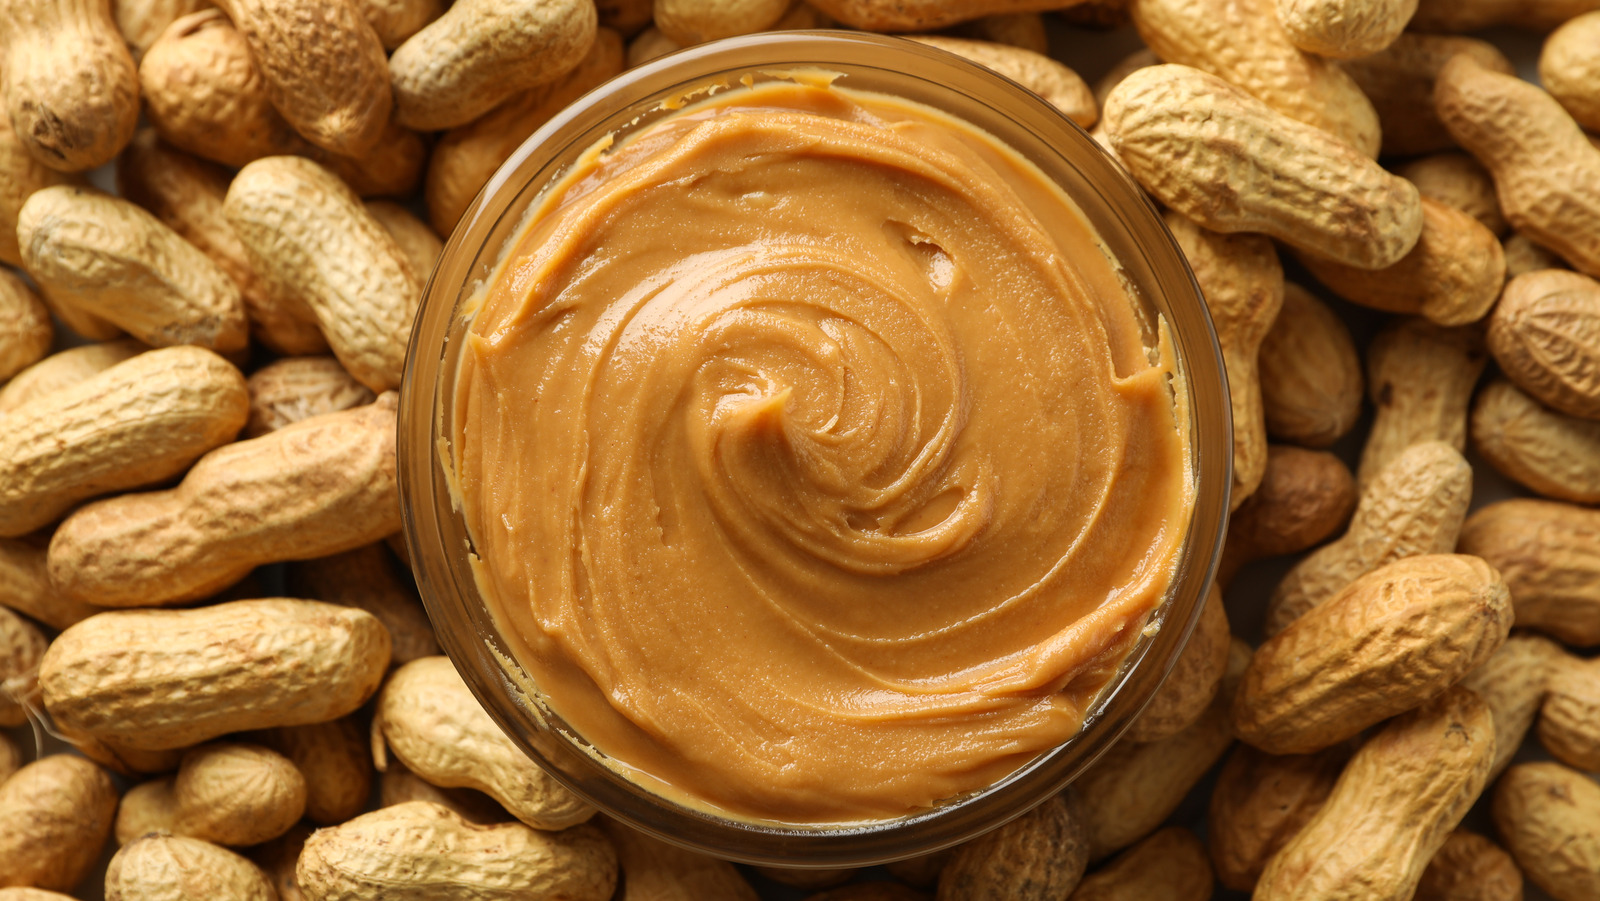 https://www.tastingtable.com/img/gallery/13-unconventional-ways-to-use-peanut-butter/l-intro-1657038567.jpg